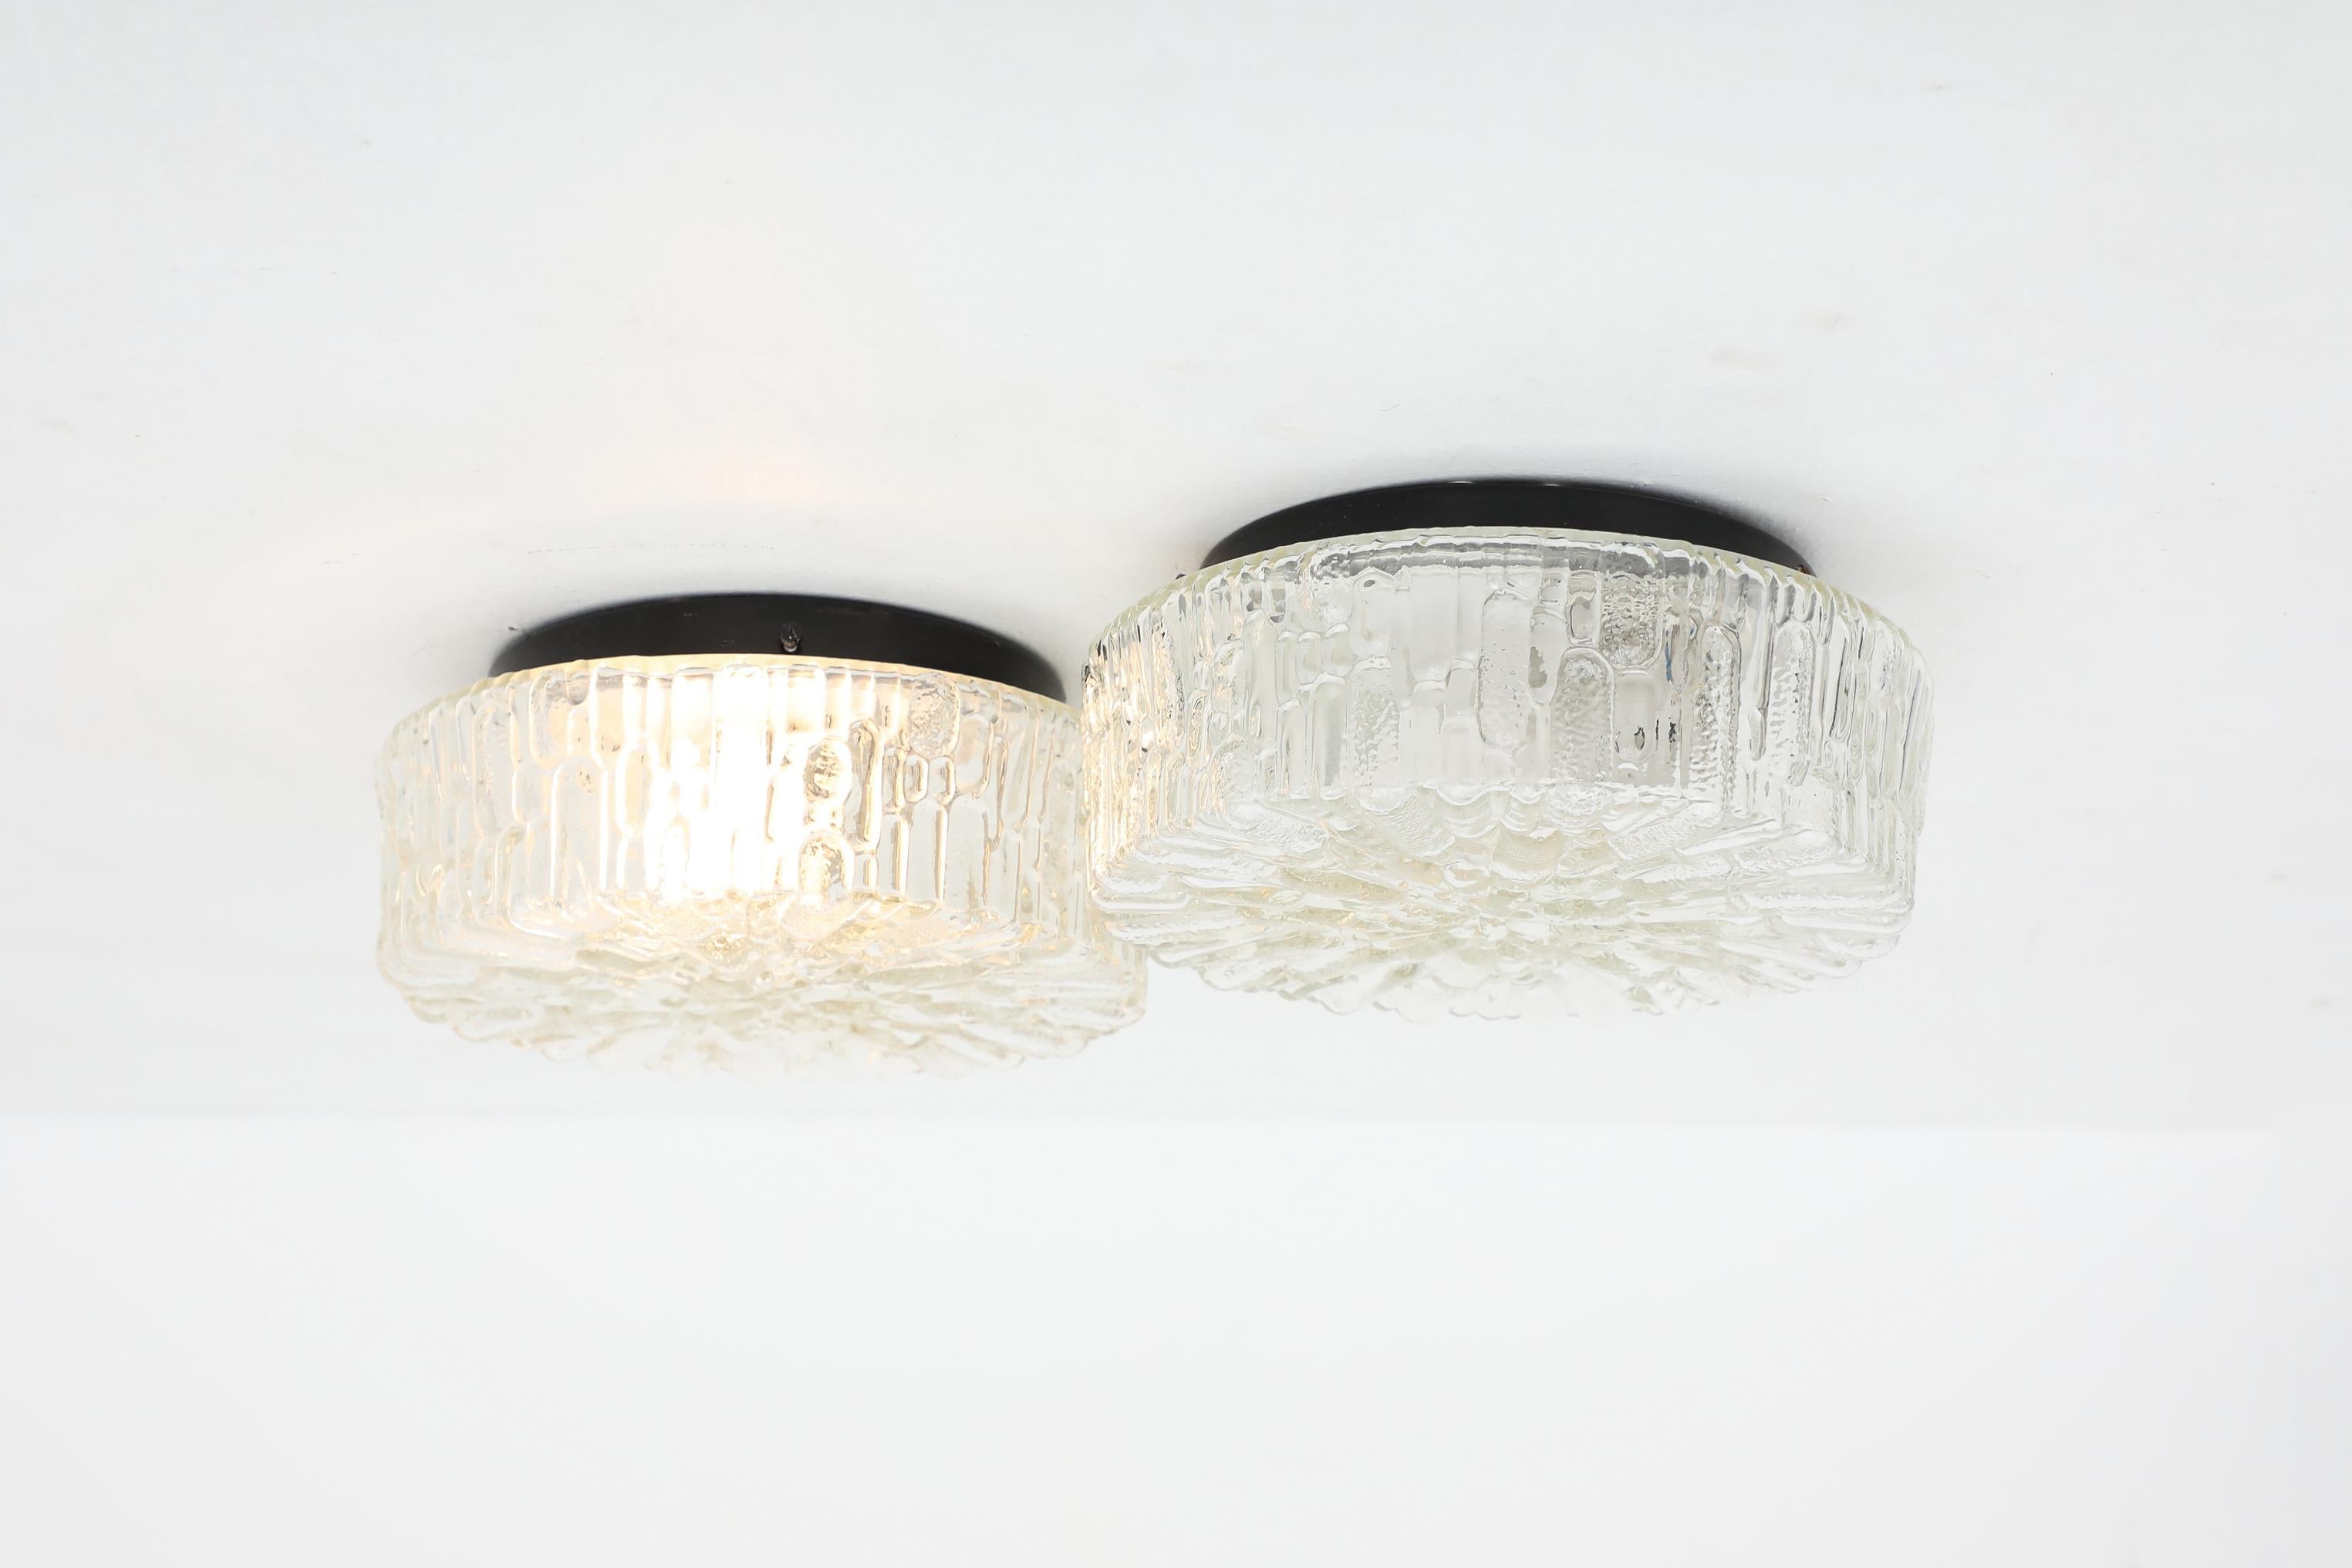 Gorgeous heavy round molded glass ceiling or wall sconces with Brutalist embossed design. In original condition with visible wear consistent with its age and use. This lamp is hardwired and takes a medium base E26/E27 bulb. Two available. Sold